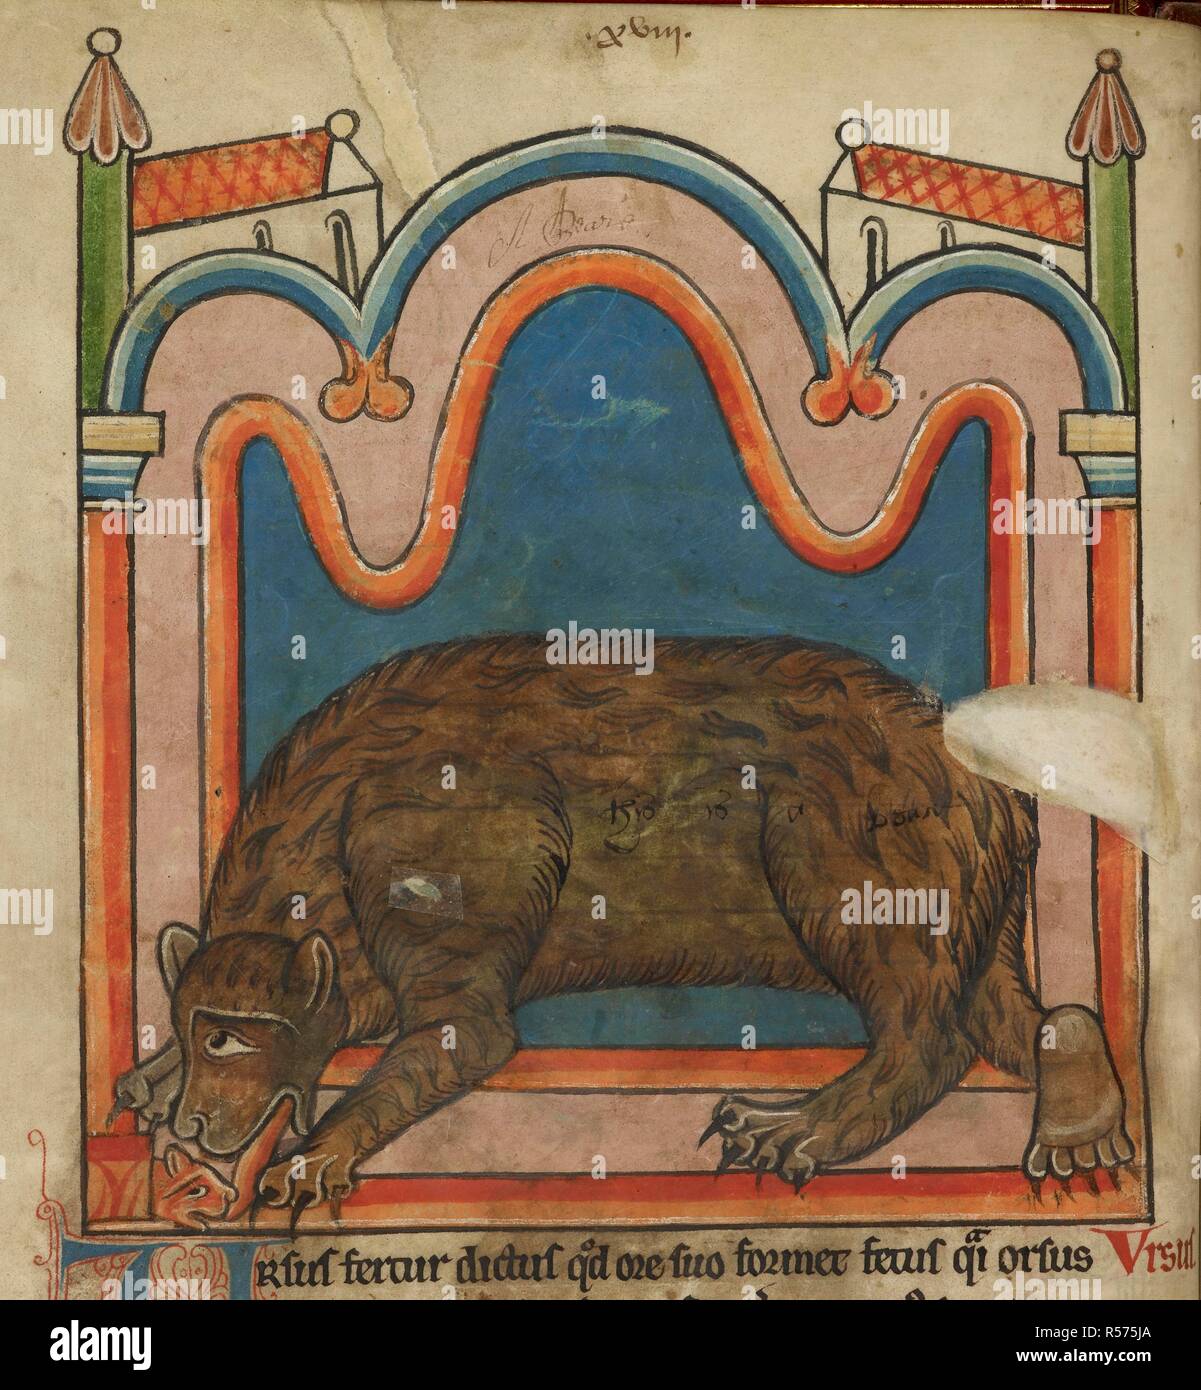 Bear licking a cub into shape. Bestiary. England (Salisbury?); 1230-1240. (Whole folio) A bear licking into shape its cub which is born eyeless and unformed.  Image taken from Bestiary.  Originally published/produced in England (Salisbury?); 1230-1240. . Source: Harley 4751, f.15v. Language: Latin. Stock Photo